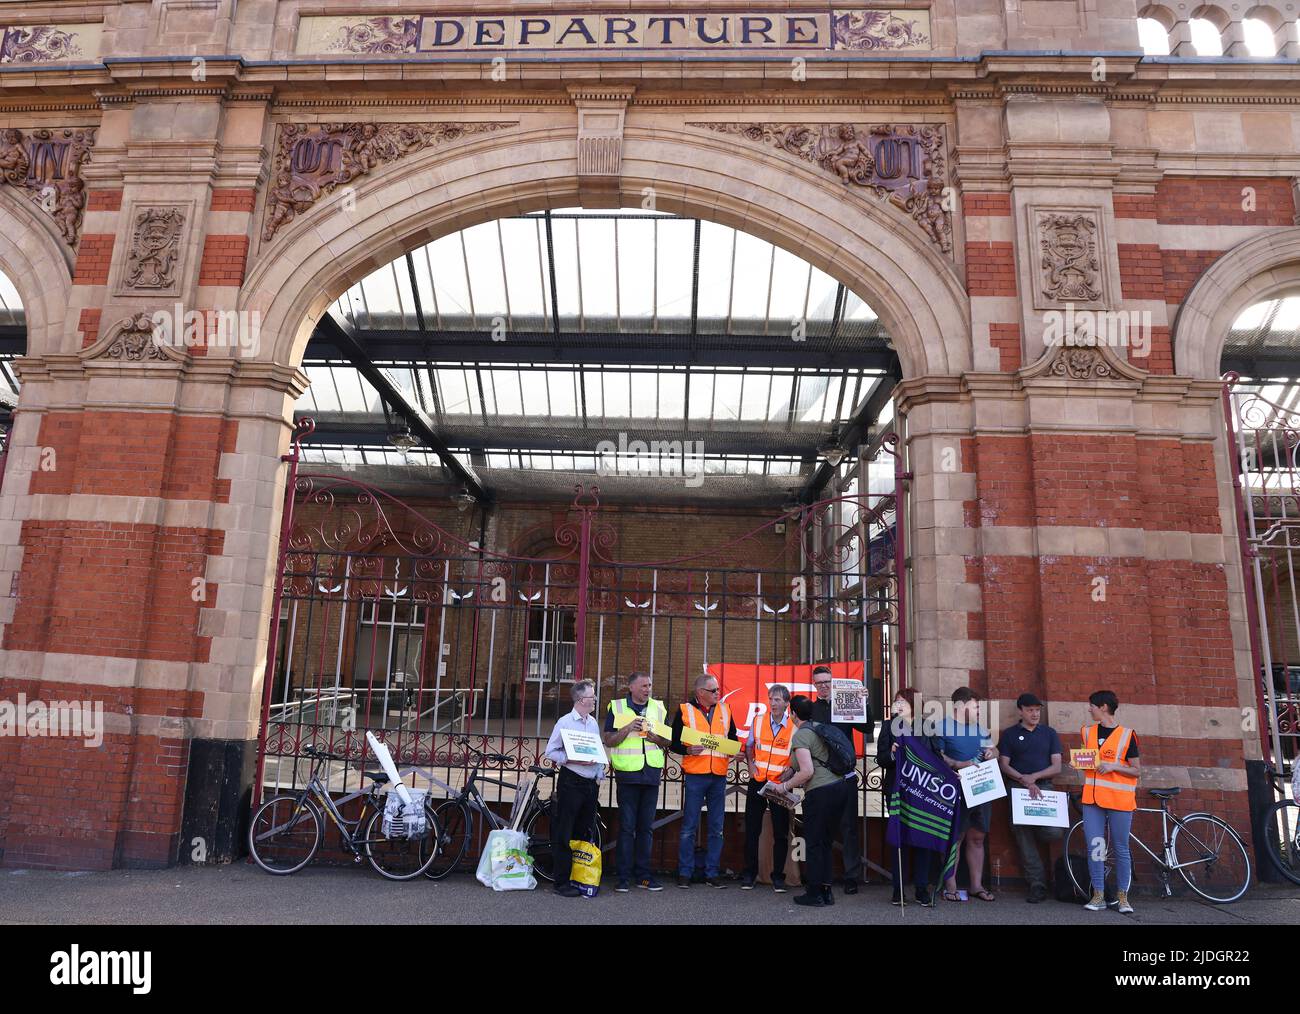 Leicester, Leicestershire, UK. 21st June 2022. Rail workers stand on a picket line as they stage the first of three national strikes. The RMT called the strikes over job cuts, pay and conditions. Credit Darren Staples/Alamy Live News. Stock Photo